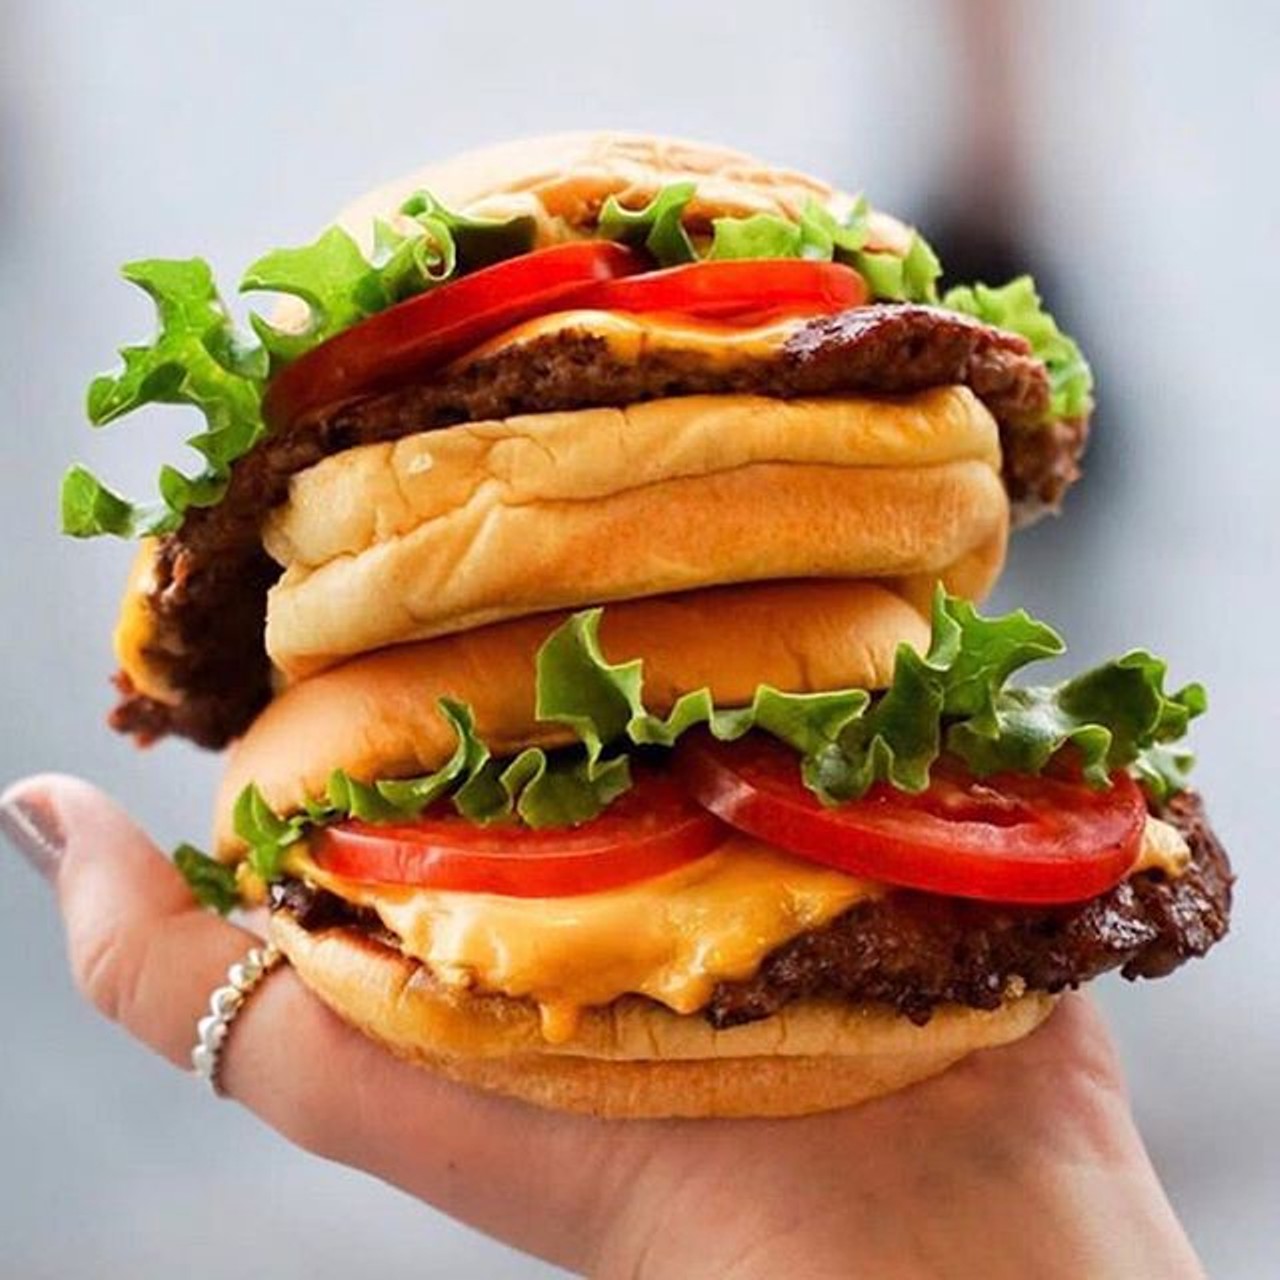 Must try:The signature ShackBurger served on a toasted bun with American cheese, lettuce, thinly sliced tomatoes and Shake Shack sauce.
Photo via Instagram user @shakeshack